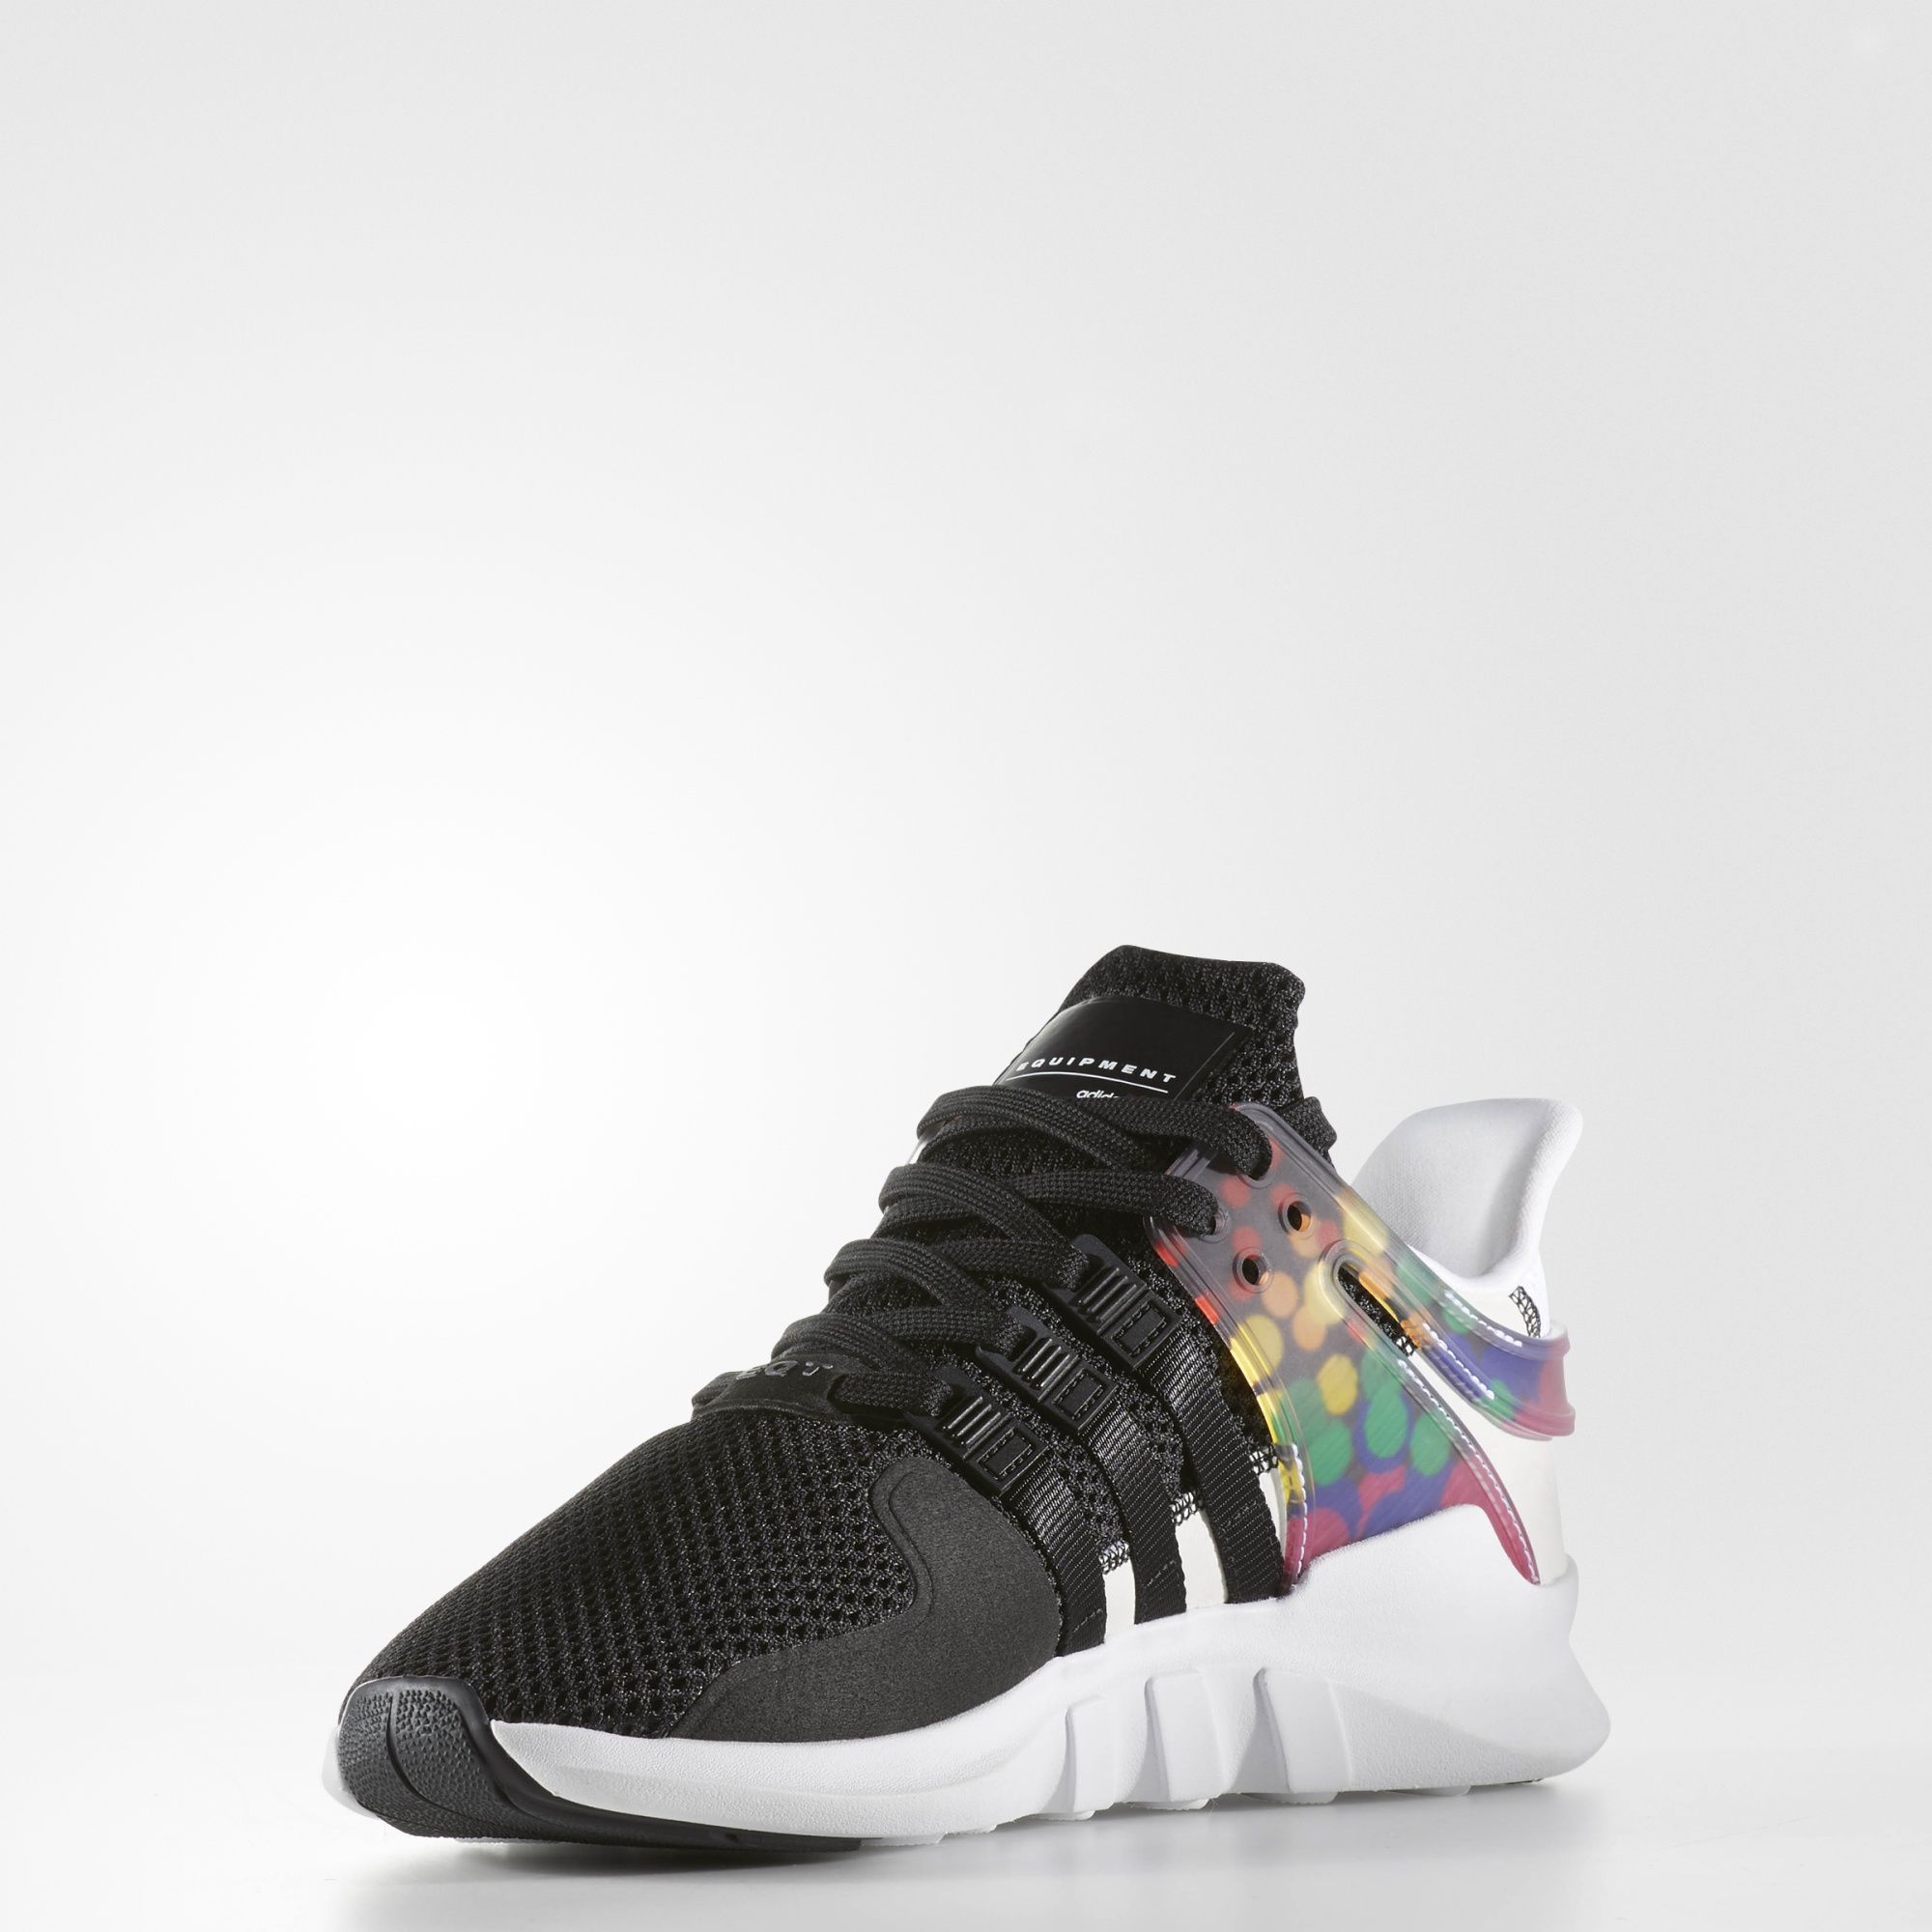 adidas-eqt-support-adv-pride-pack-3